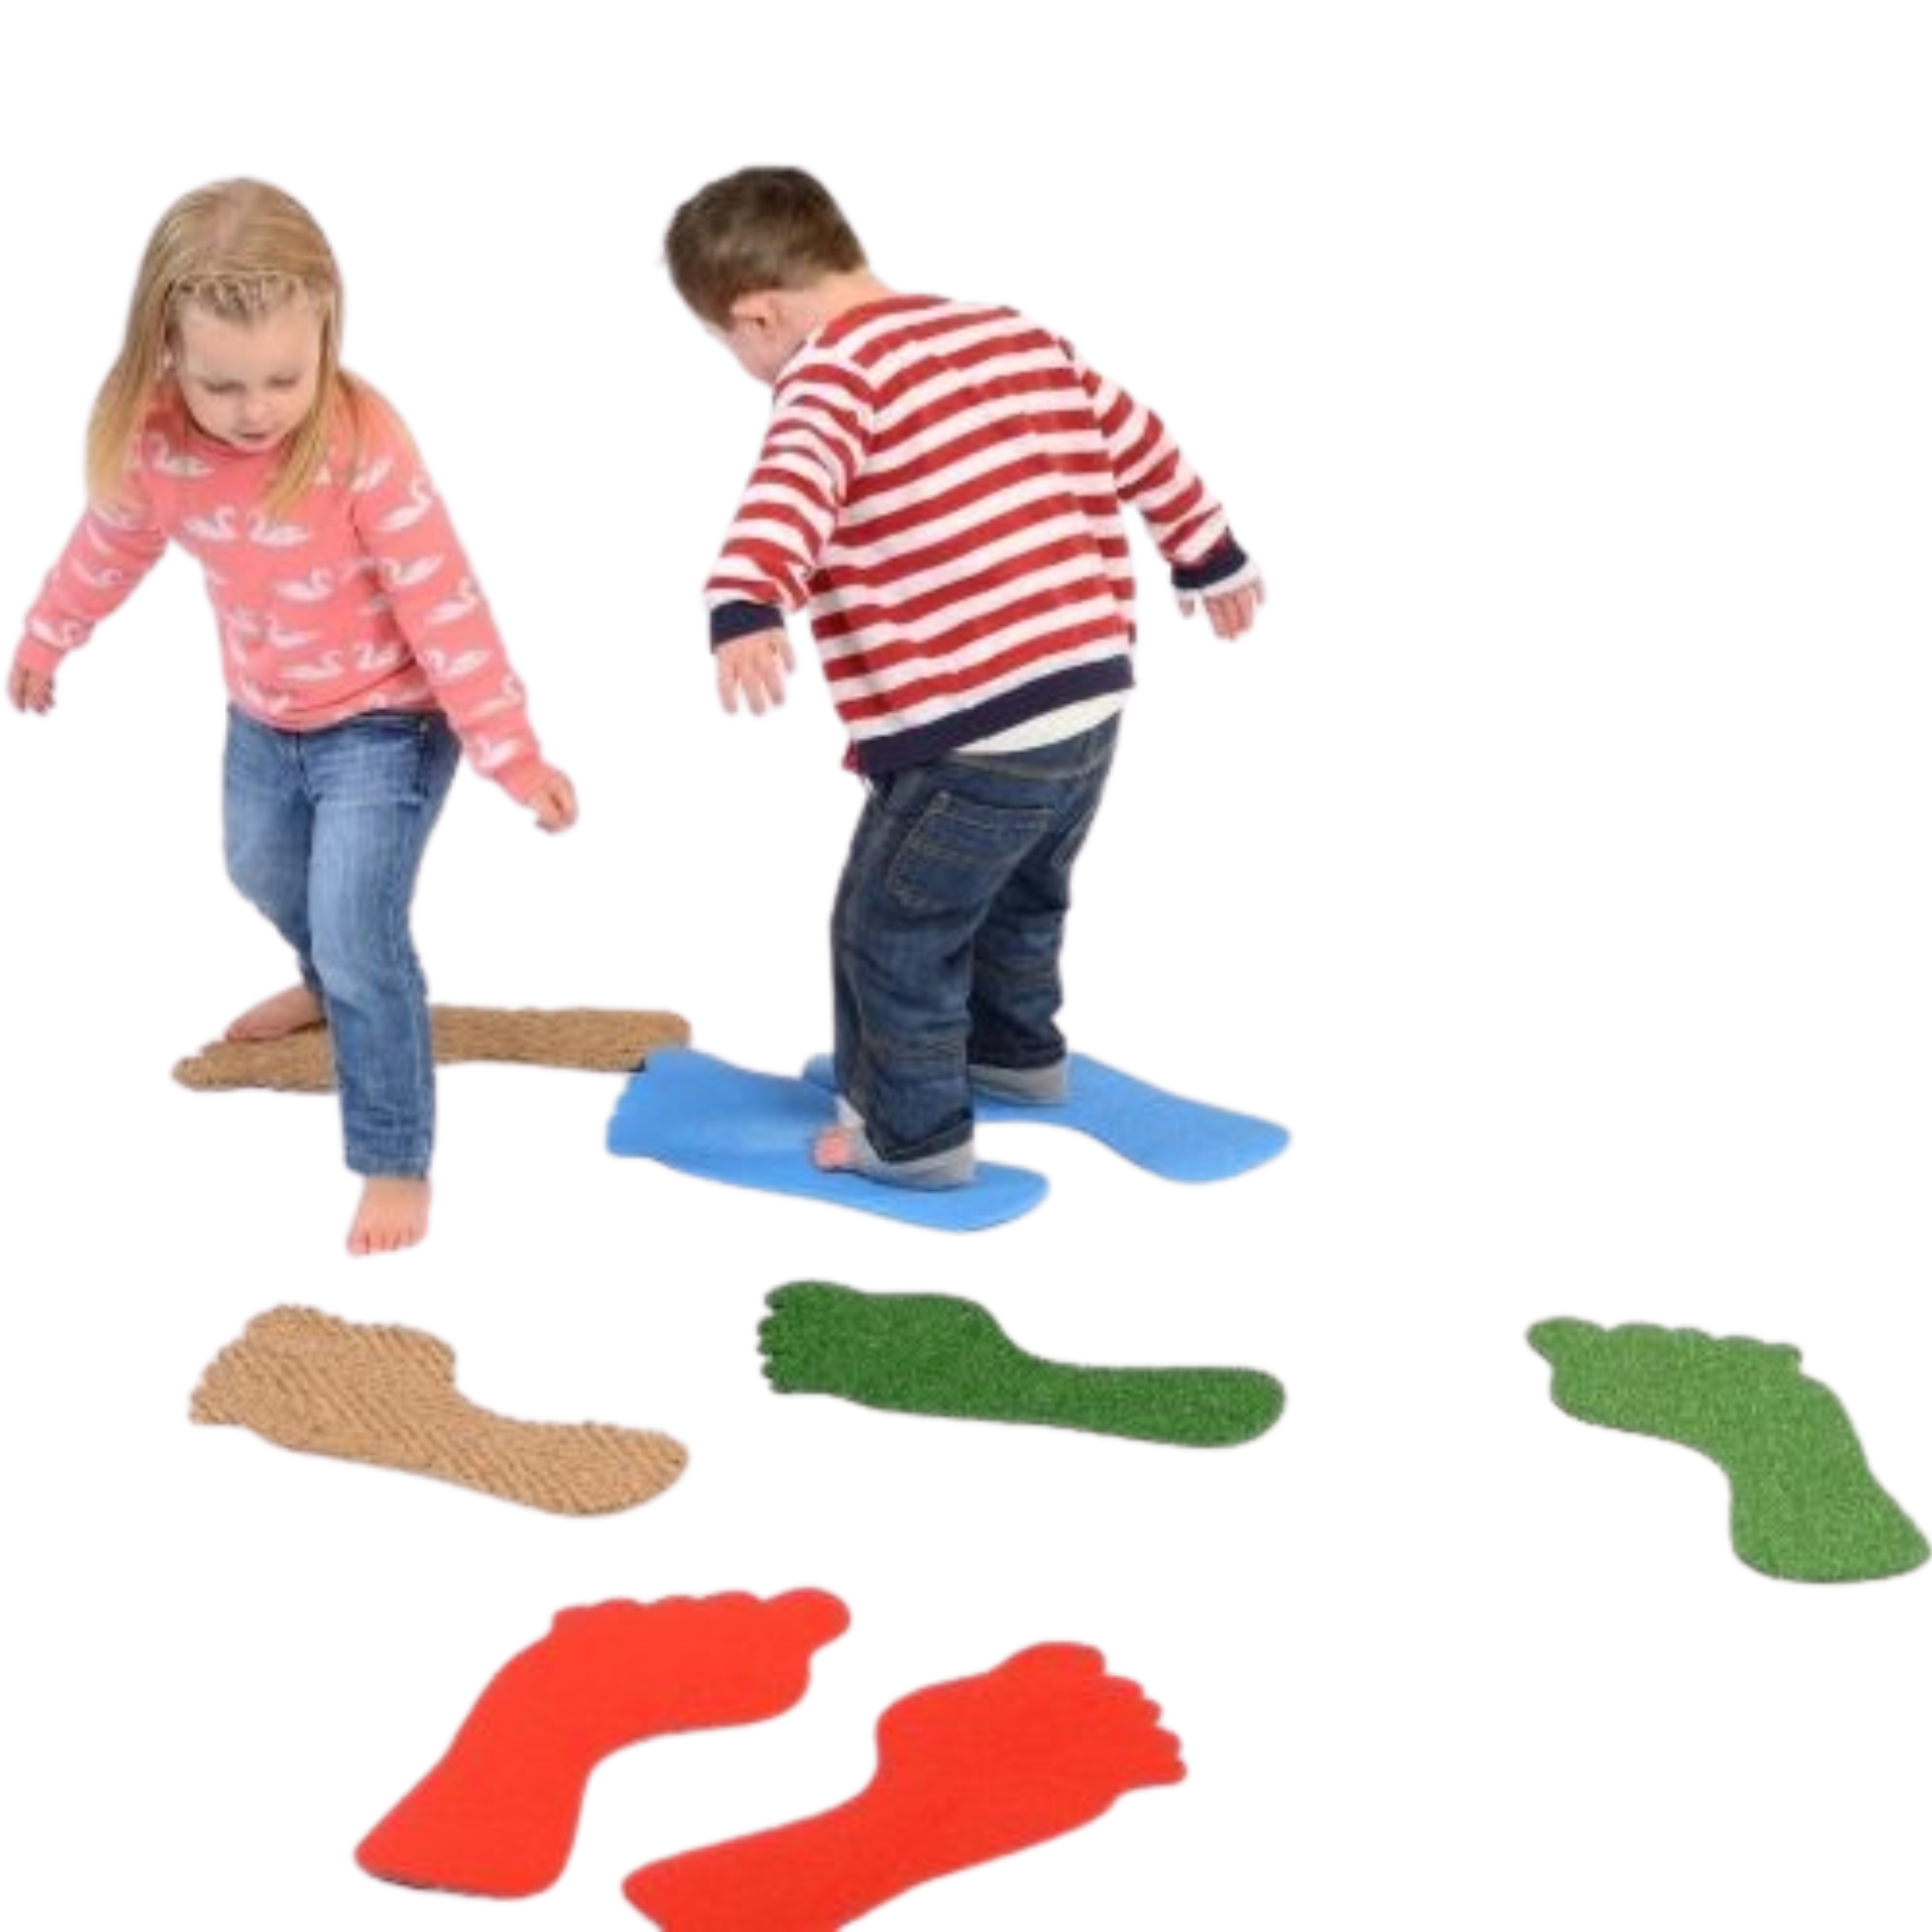 Textured Feet, Introducing our Textured Feet Set of 8, the perfect addition to your children's playtime! This set compromises of 4 pairs of feet cutouts, each designed with unique feels and textures to enhance sensory exploration.Made with high-quality materials, our textured play feet are ideal for stimulating your child's senses and promoting an interactive play experience. Whether it's jumping, hopping, or pretending to walk like different animals, these feet cutouts invite endless imaginative play possi